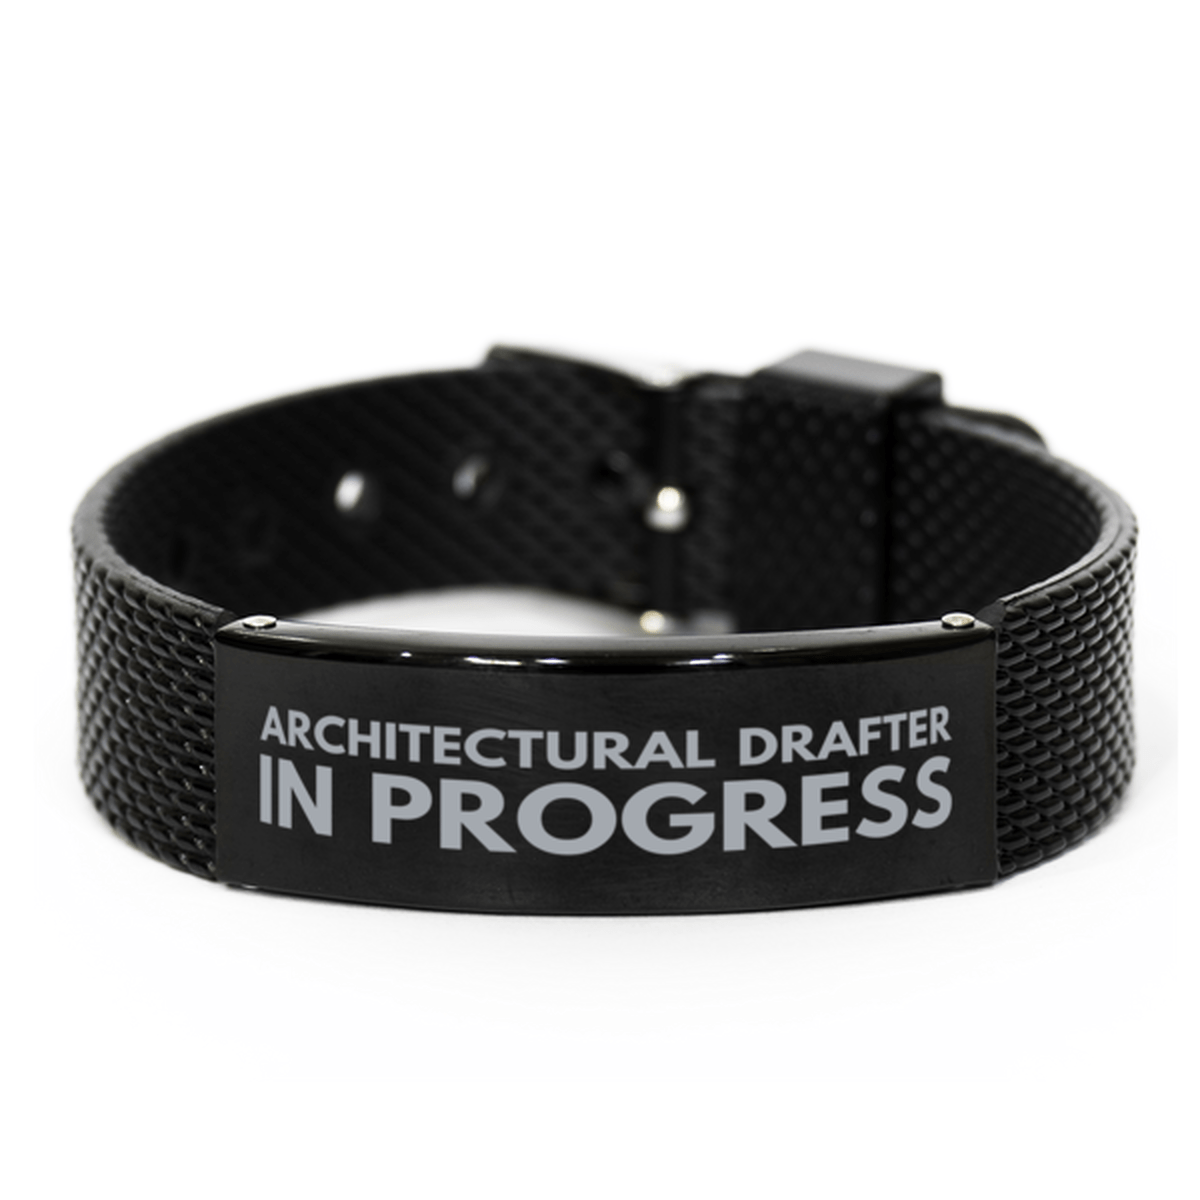 Inspirational Architectural Drafter Black Shark Mesh Bracelet, Architectural Drafter In Progress, Best Graduation Gifts for Students